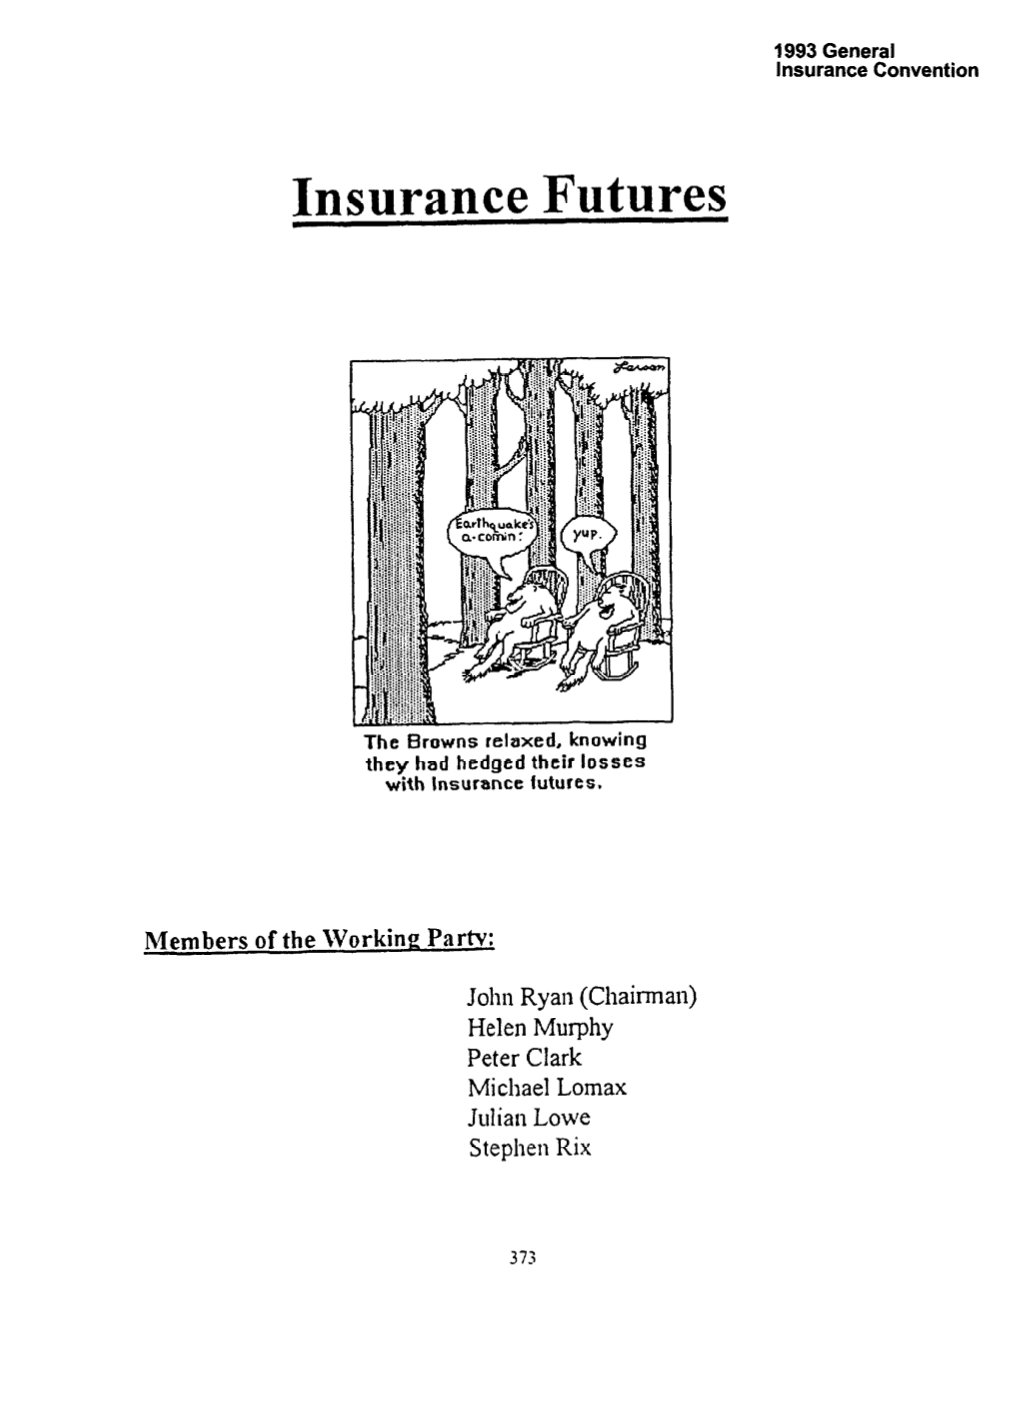 Insurance Futures and Options 5